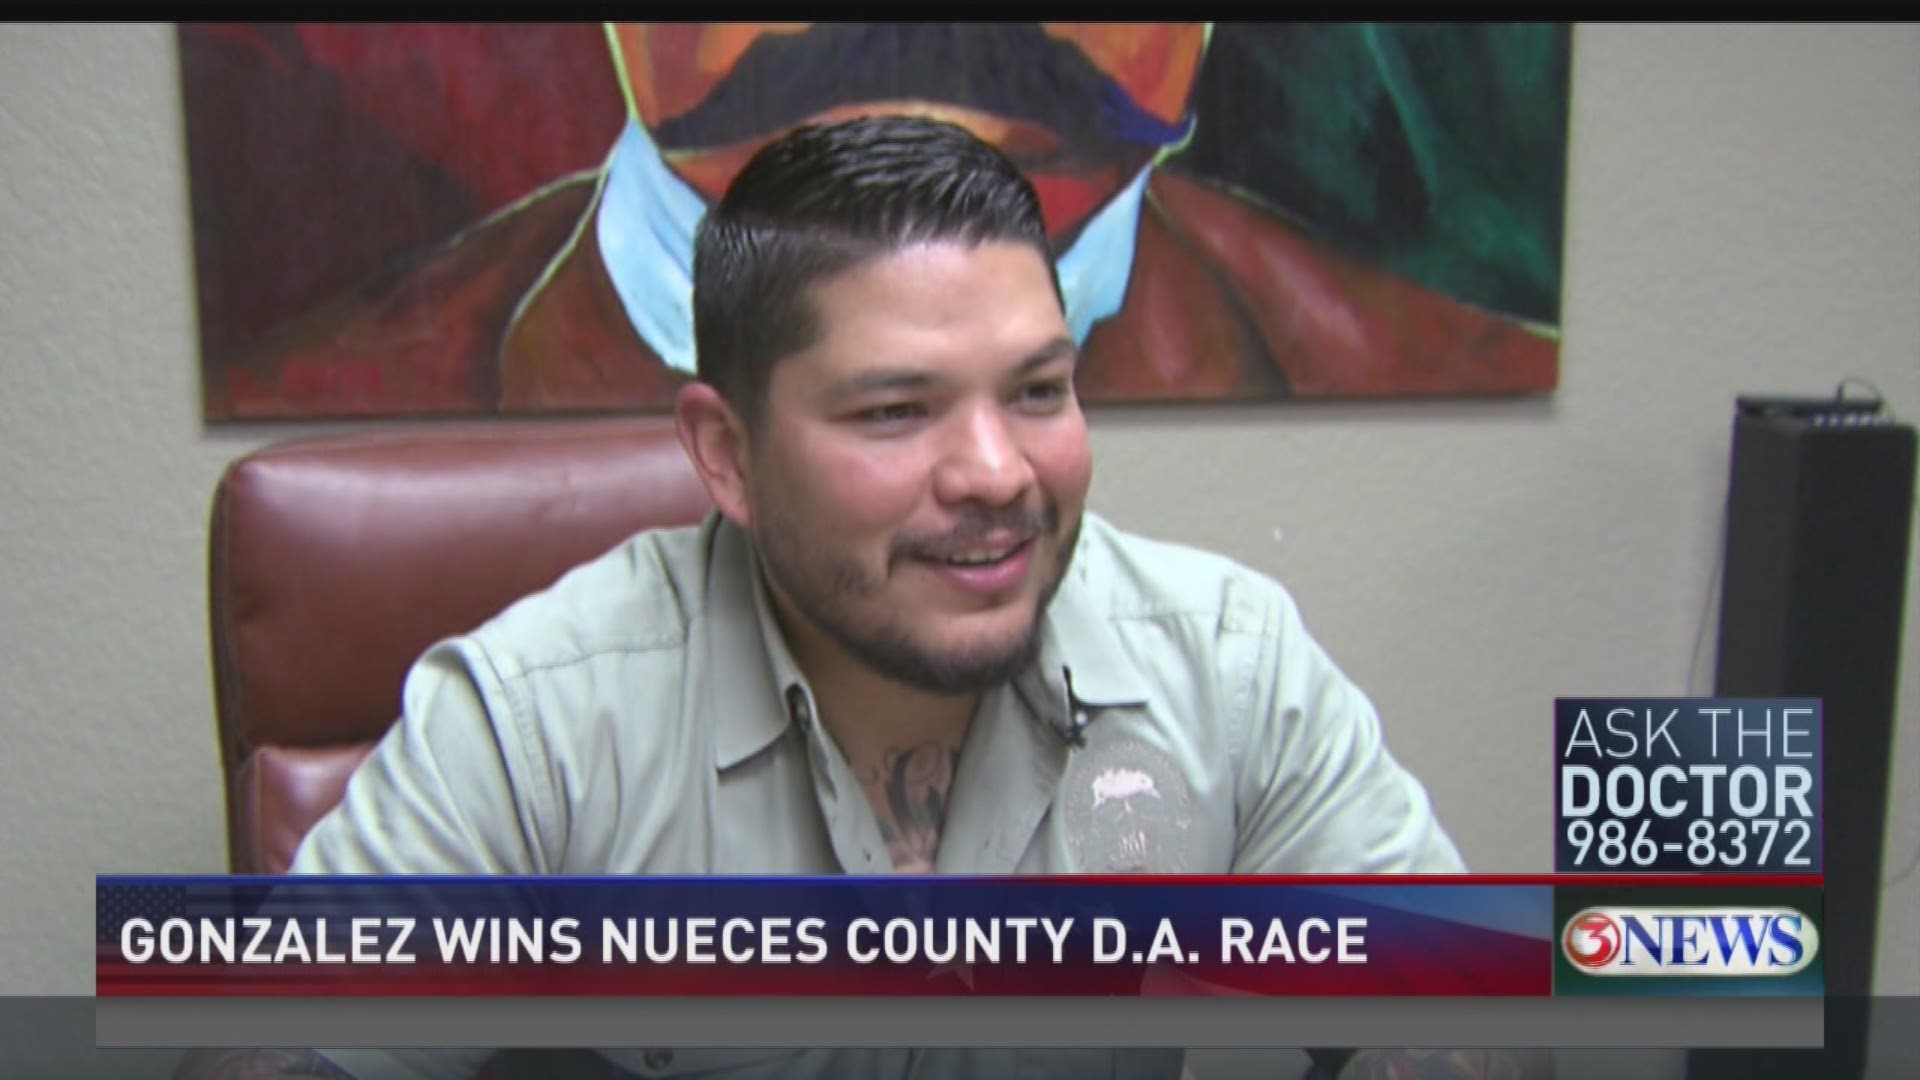 Mark Gonzalez had to wait until early Wednesday morning to hear the results that determined he will be the next Nueces County District Attorney.